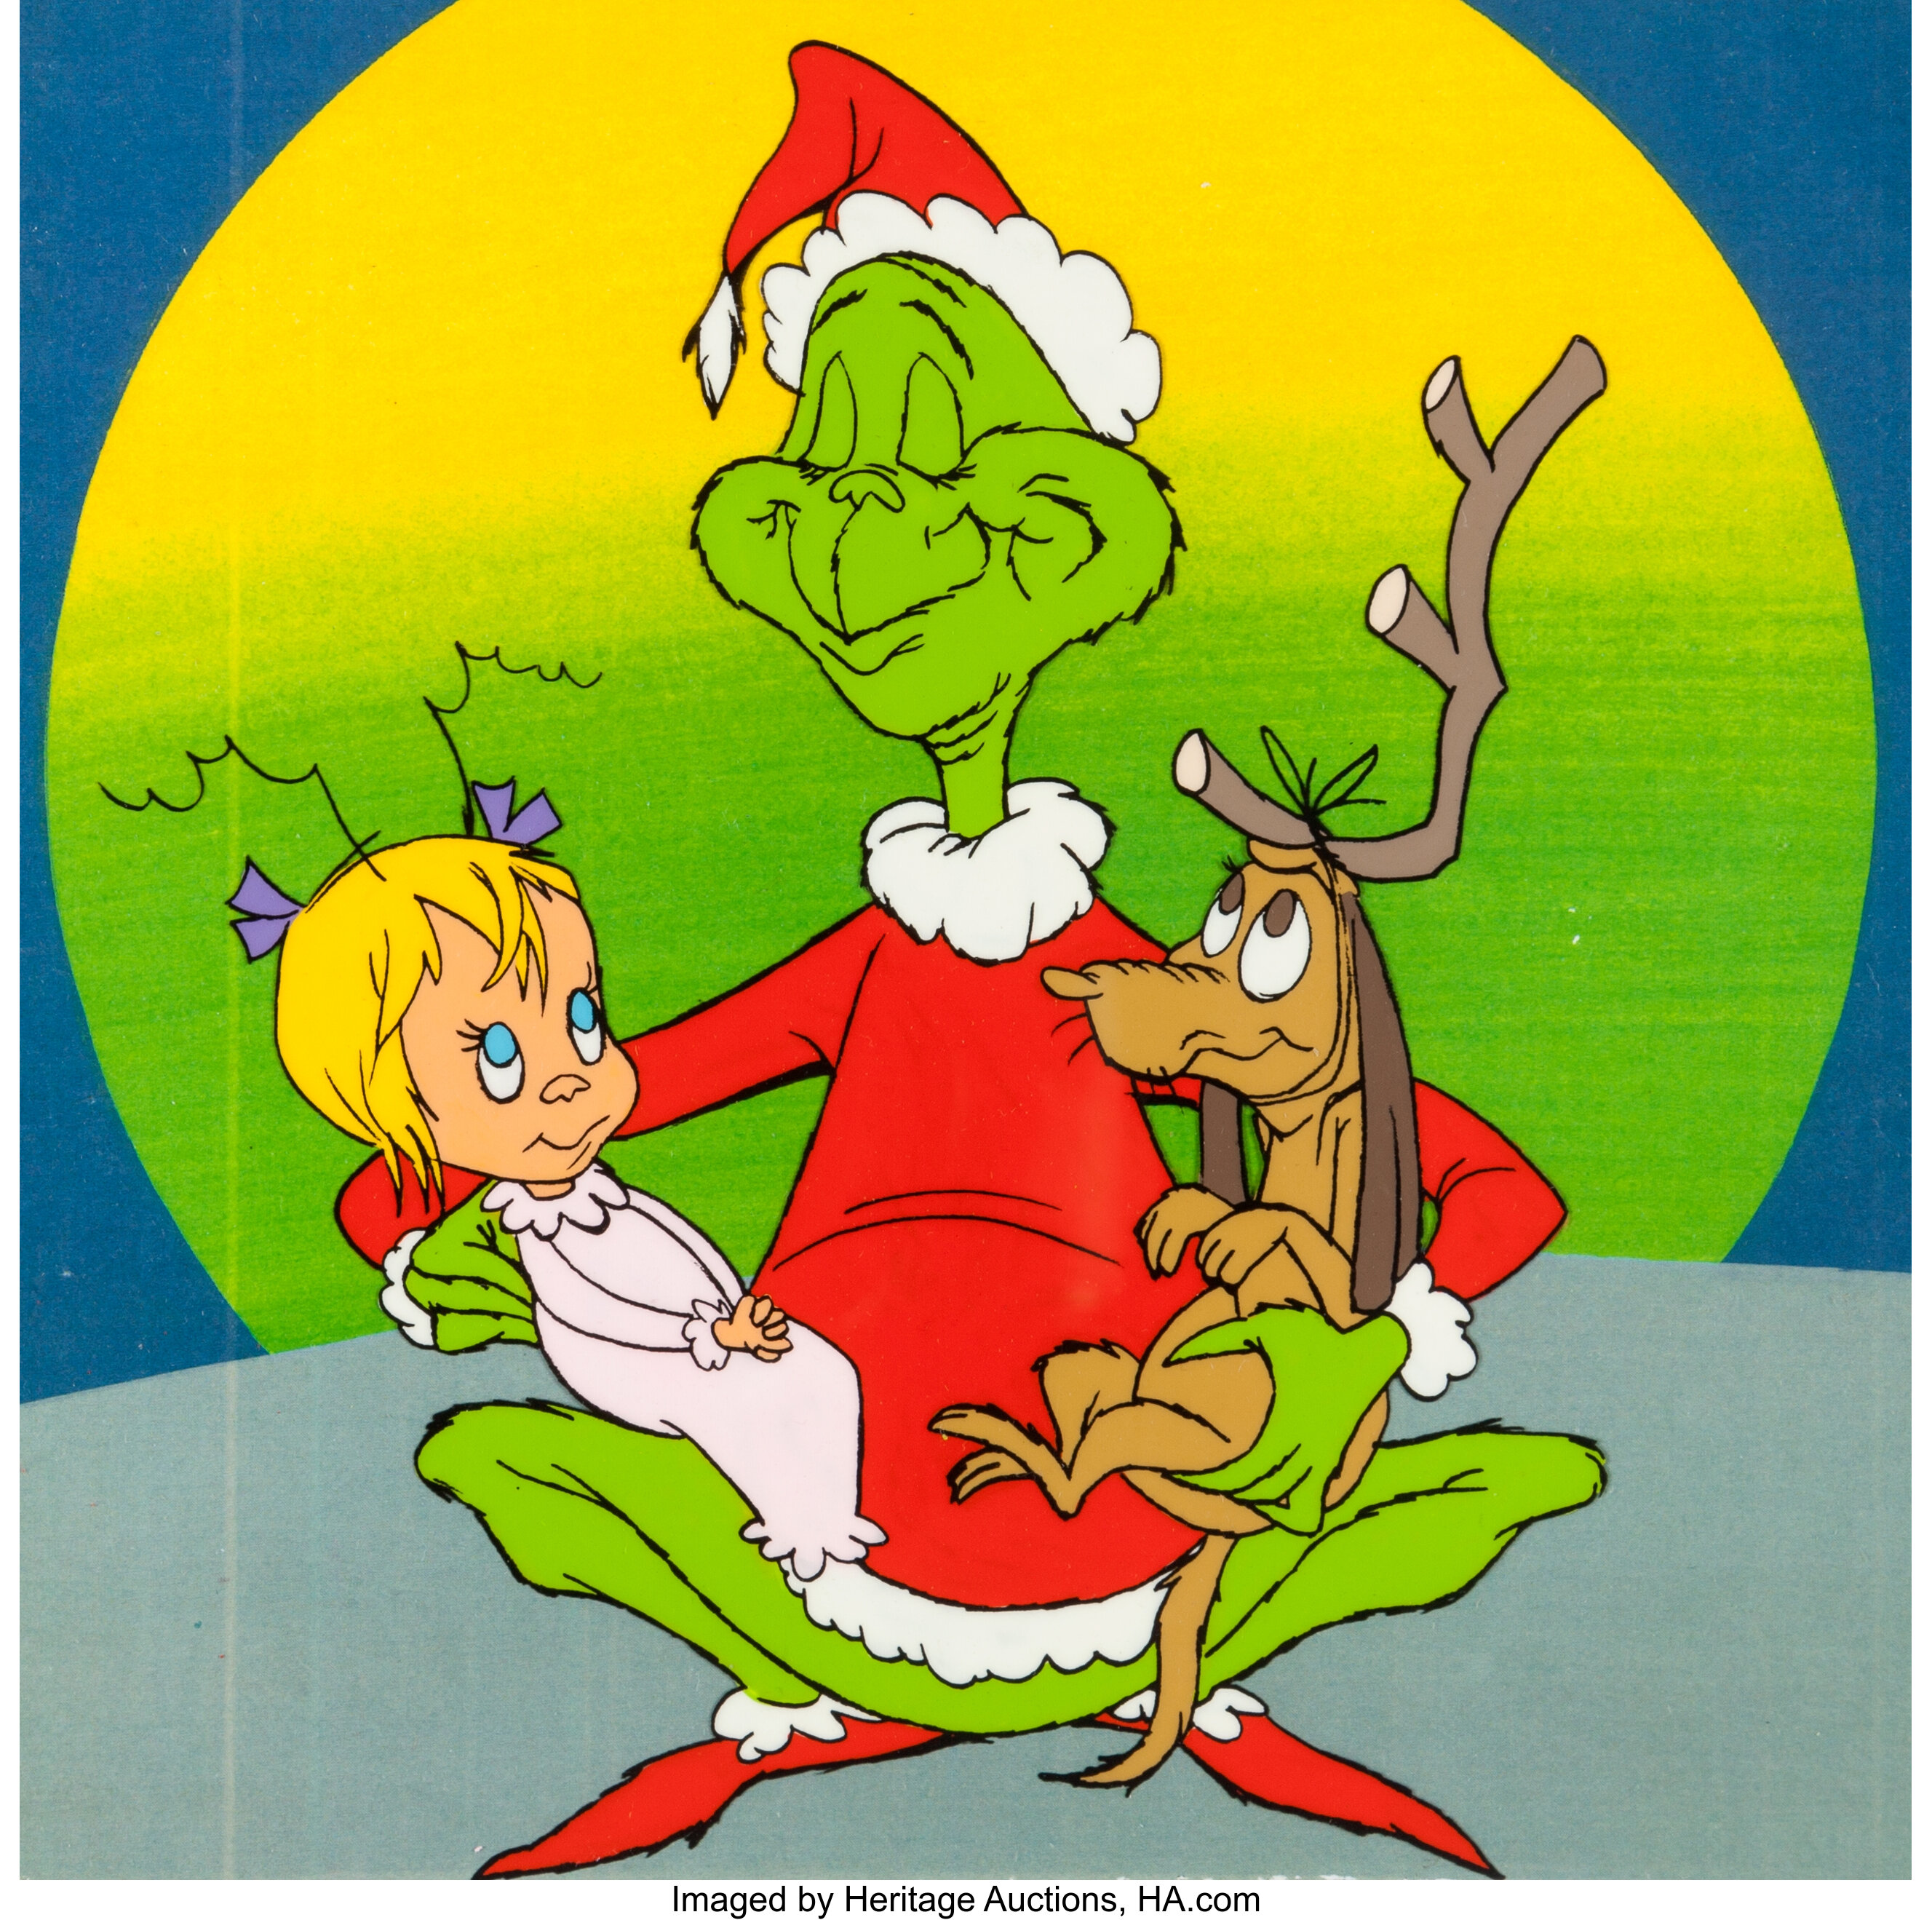 The Grinch Cartoon Characters Images : Download High Quality Grinch ...